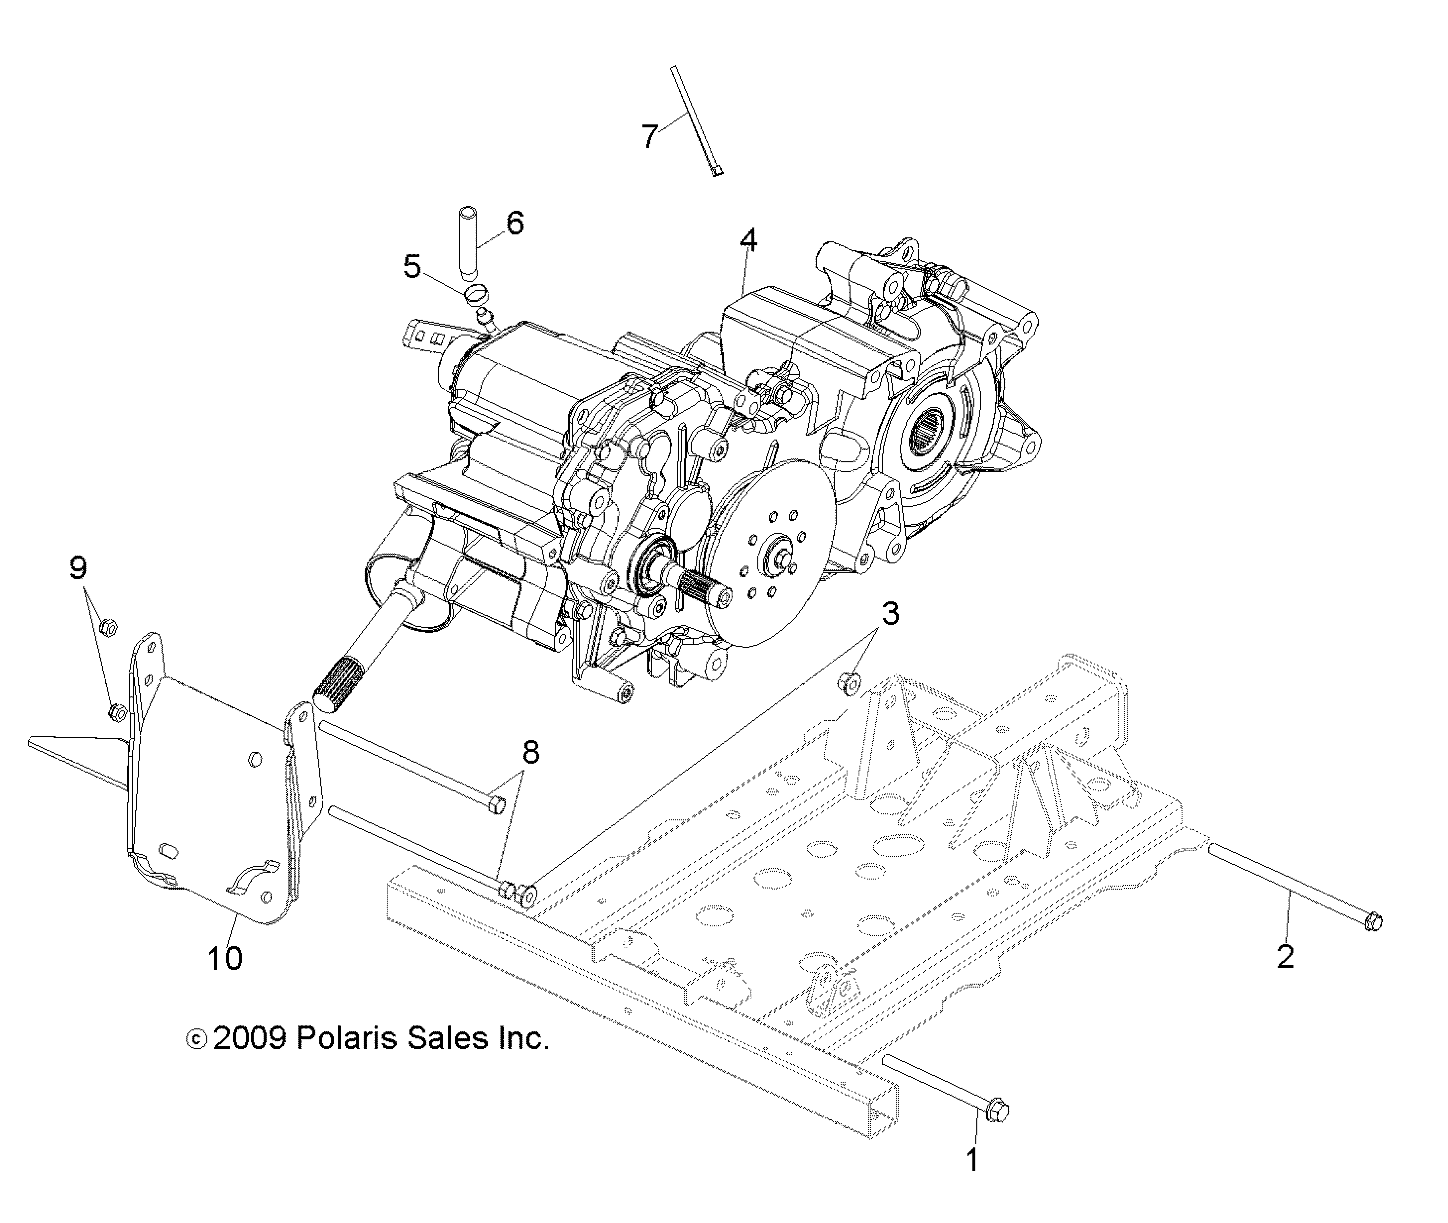 Part Number : 1332872 MAIN GEARCASE ASSEMBLY